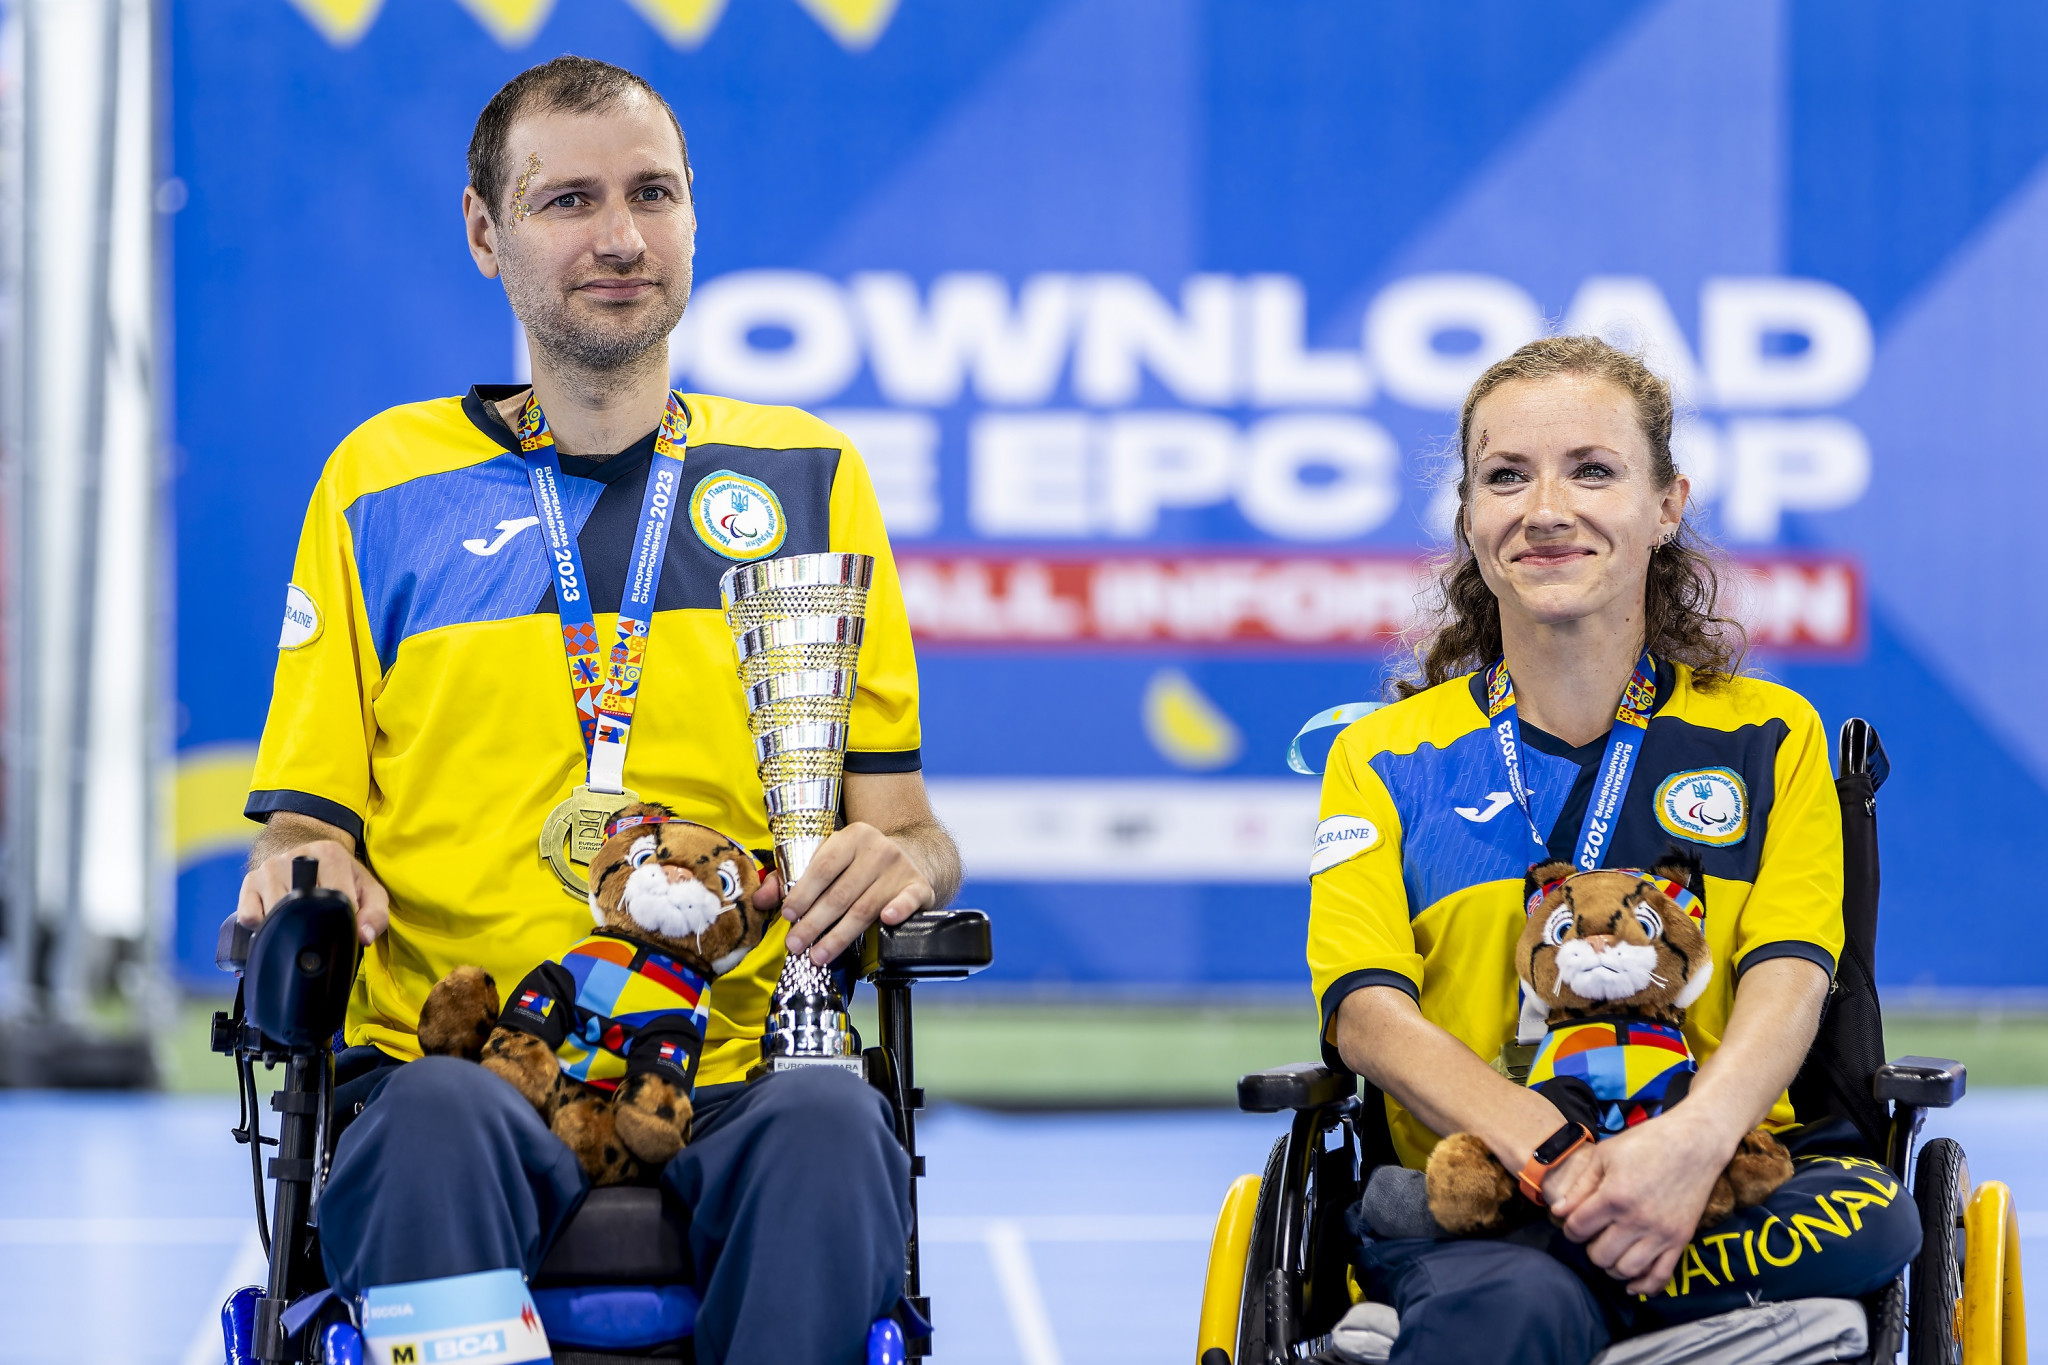 Ukraine were among the gold medallists on the final day of boccia action ©EPC